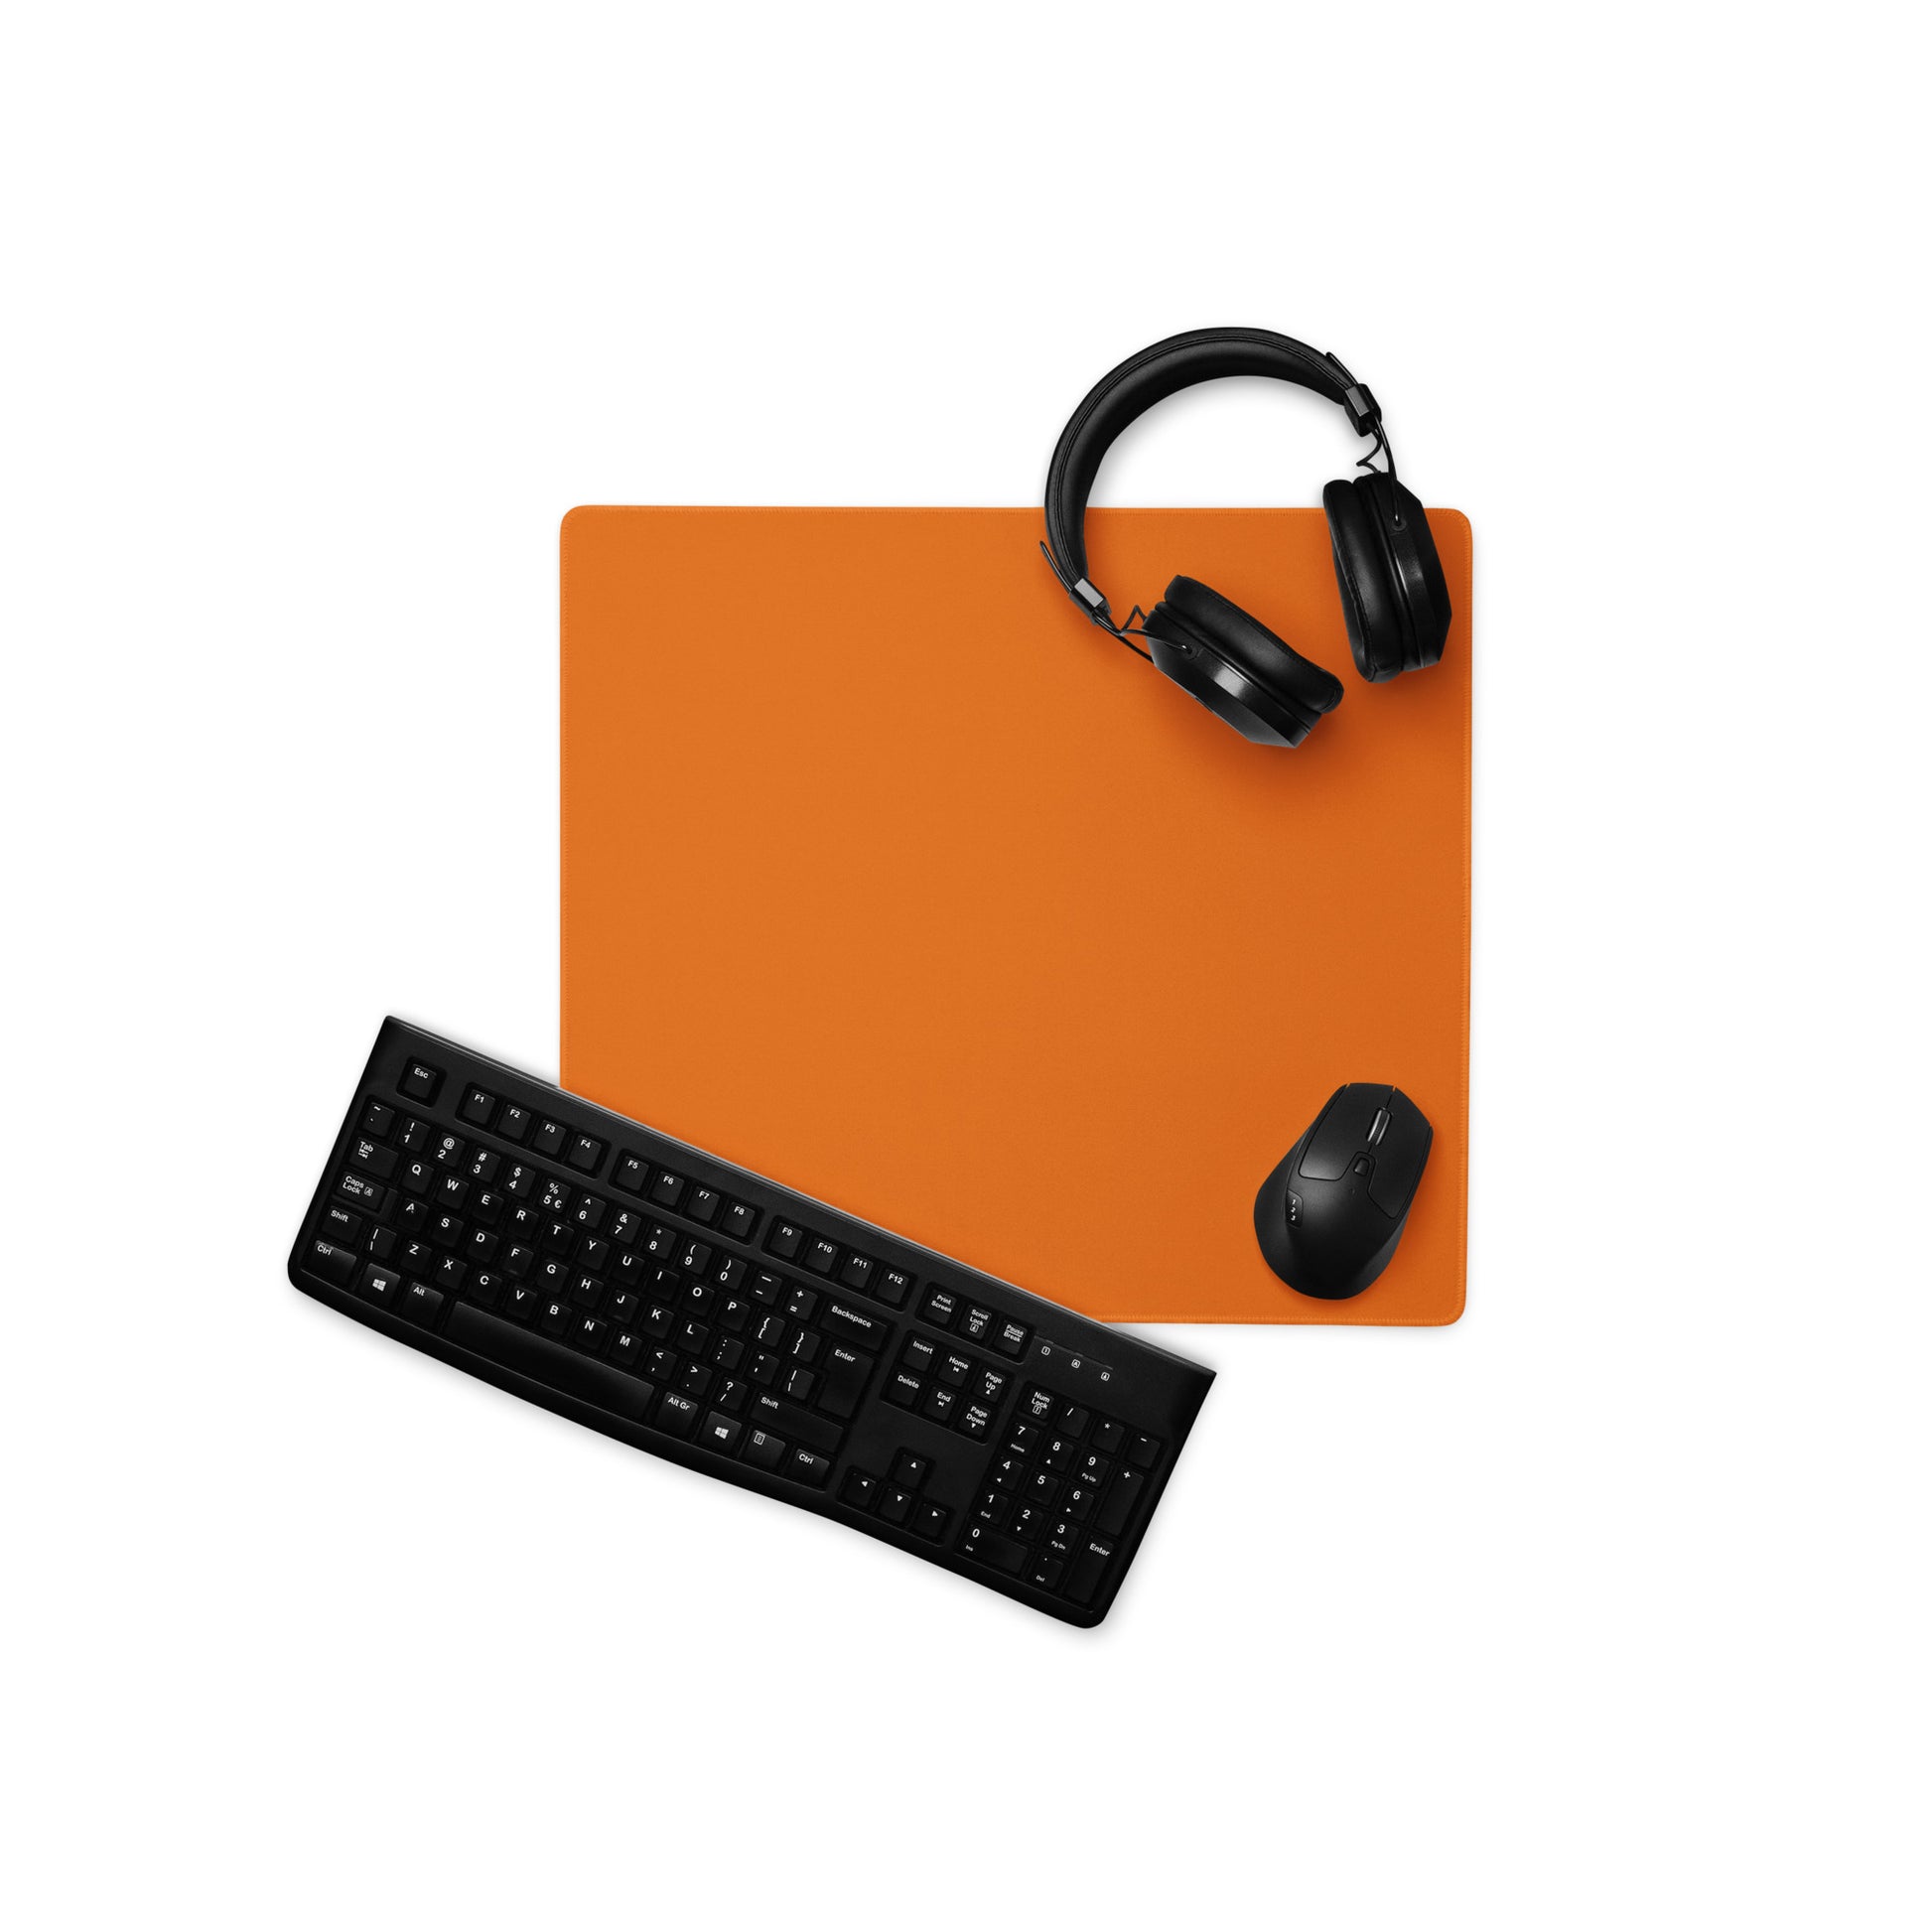 An 18" x 16" orange gaming desk pad with a keyboard, mouse, and headphones sitting on it.